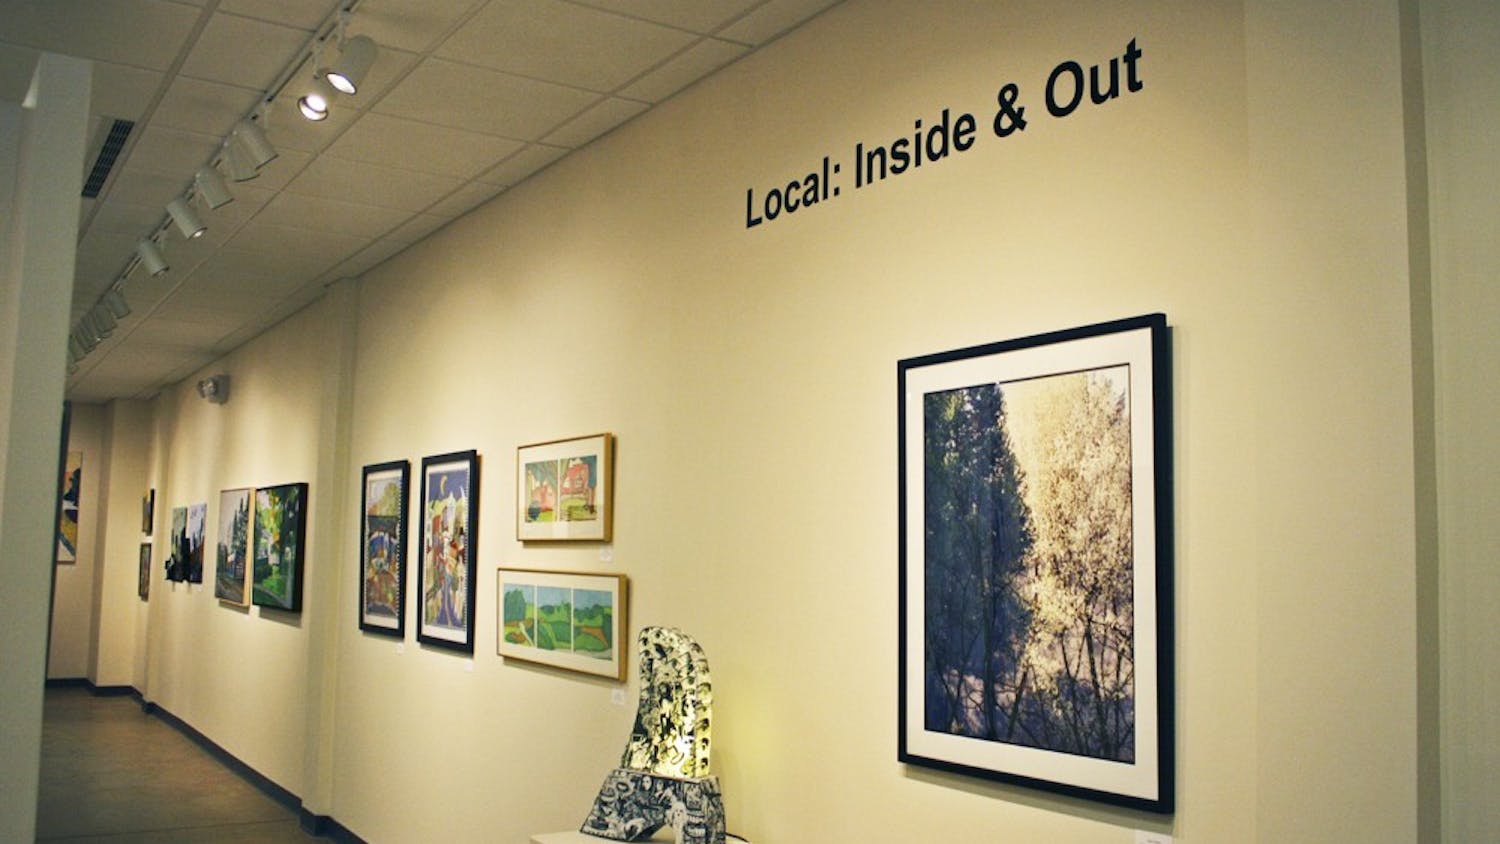 Frank Art Gallery, located on East Franklin St., has a new exhibit called "Local: Inside and Out." This exhibit is a collection of art that shows artists' view of North Carolina and what makes home so special. 